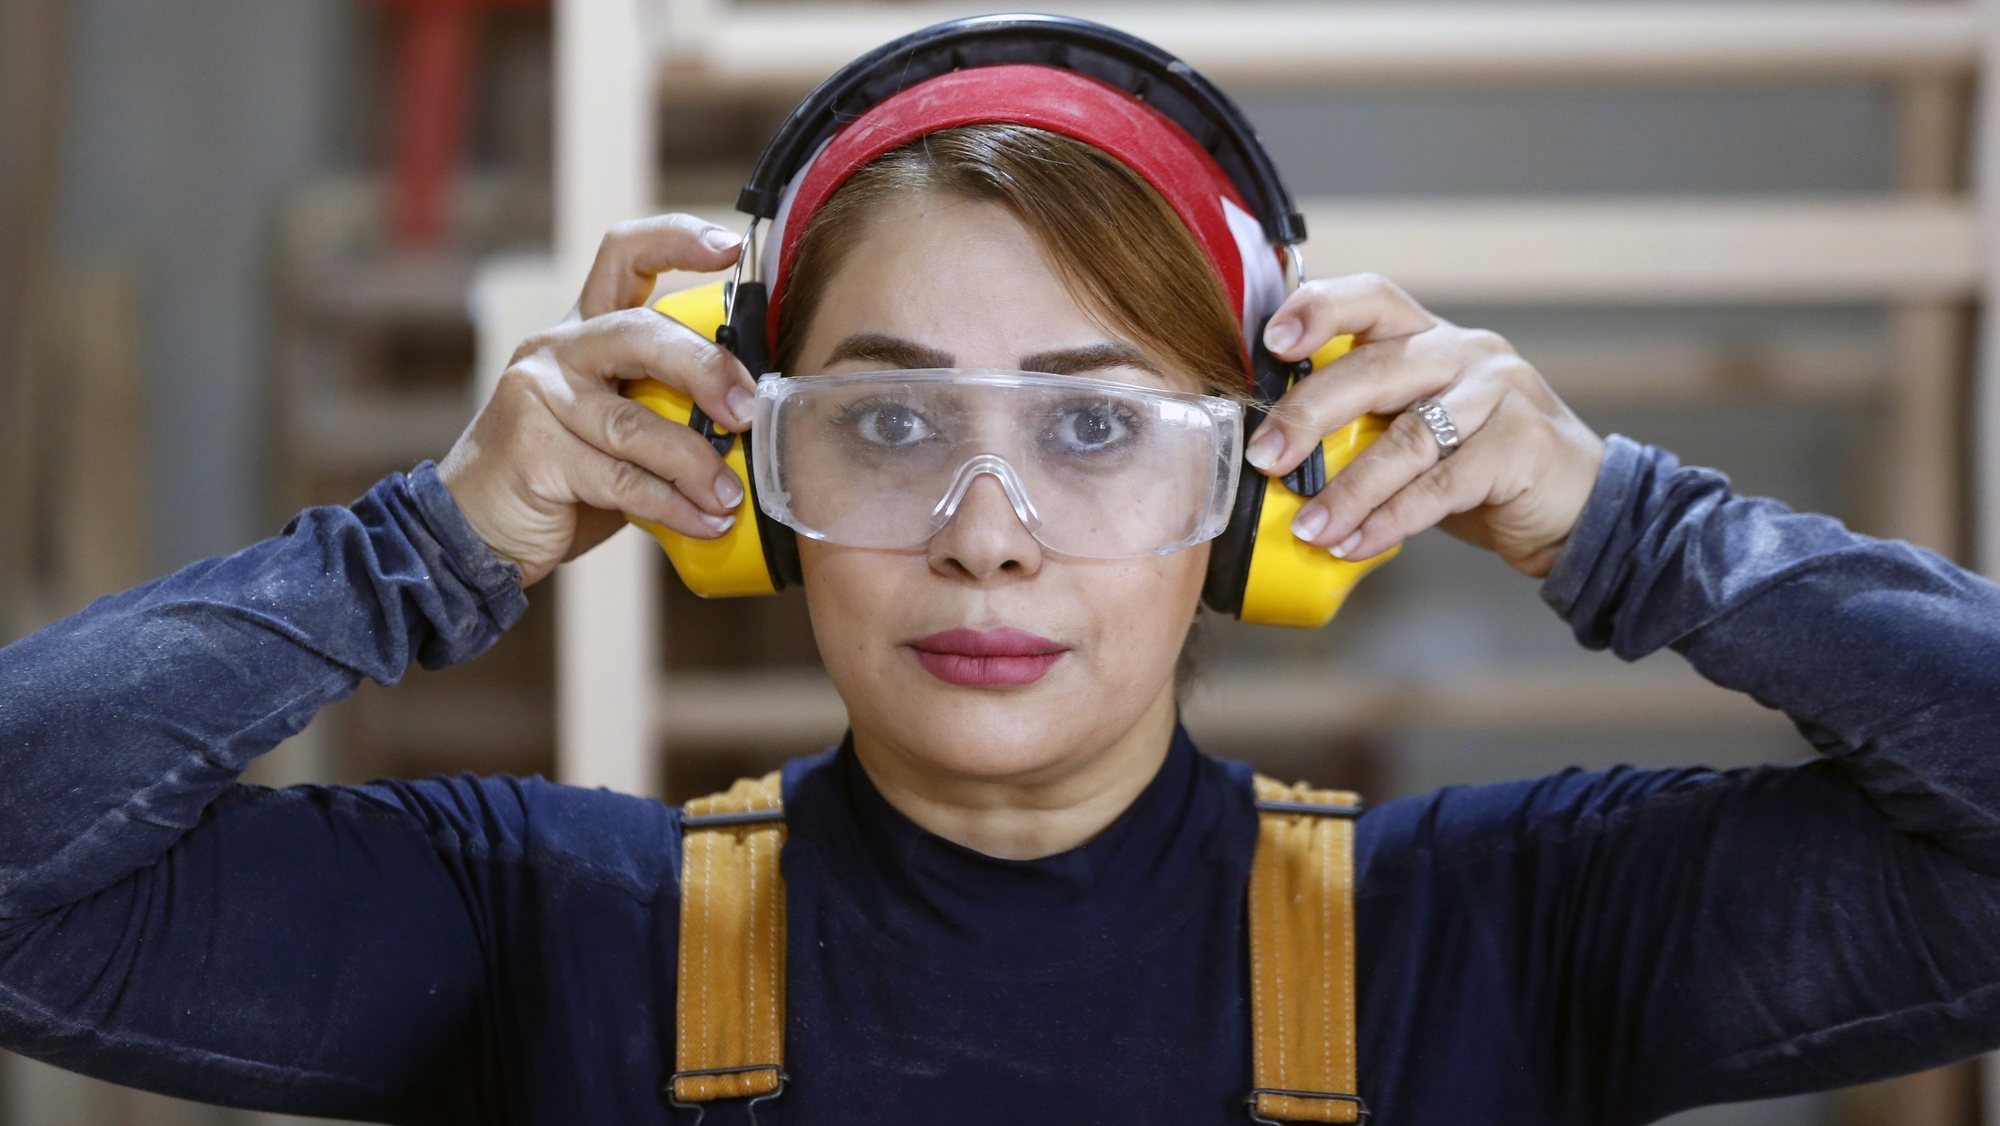 epa10604566 Iranian woman carpenter Sahar Biglari adjusts ear protectors while working at her workshop in Tehran, Iran, 02 May 2023. Biglari, 41, says she left her job as a math and physics teacher to become a carpenter to break the &#039;taboo&#039; as woodworking is traditionally considered to be a male-dominated profession. She has become a social media influencer and a celebrity woodworker. &#039;Most of my followers and students are men now, however when I started my new career I received many negative responses from men, but now they respect me and ask for help&#039;, Sahar says. She is considered to be the first female carpenter in Iran to earn money from the job.  EPA/ABEDIN TAHERKENAREH  ATTENTION: This Image is part of a PHOTO SET